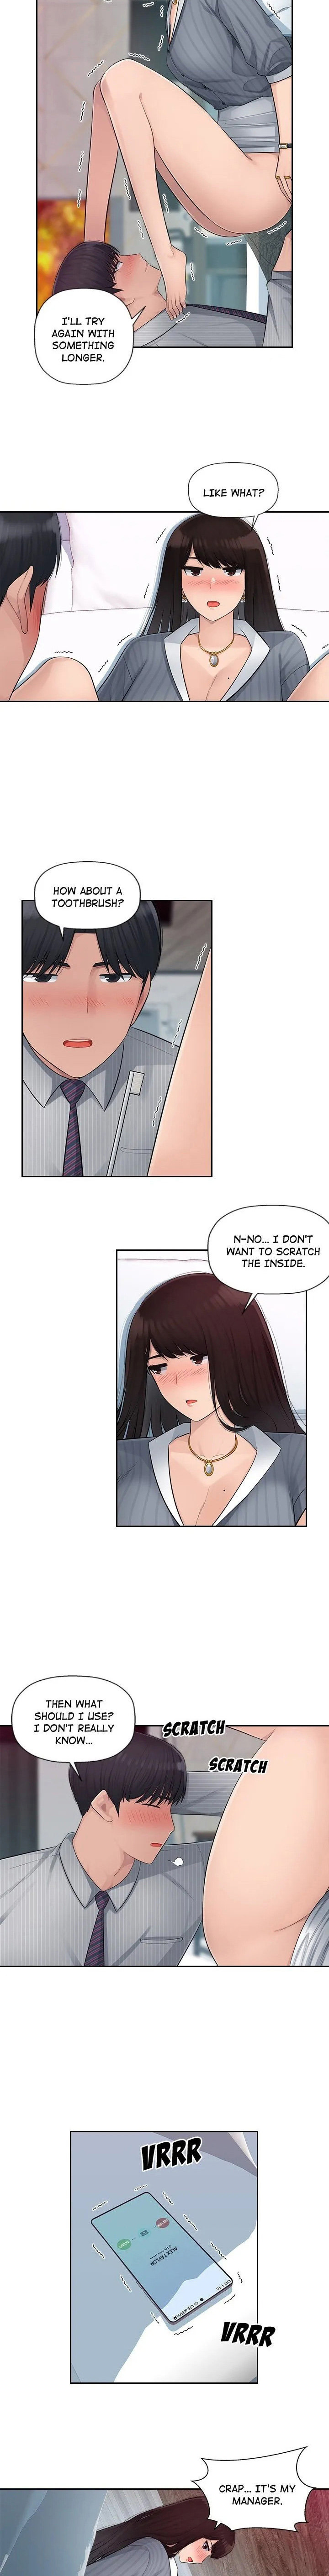 Office Desires Chapter 3 - Page 3